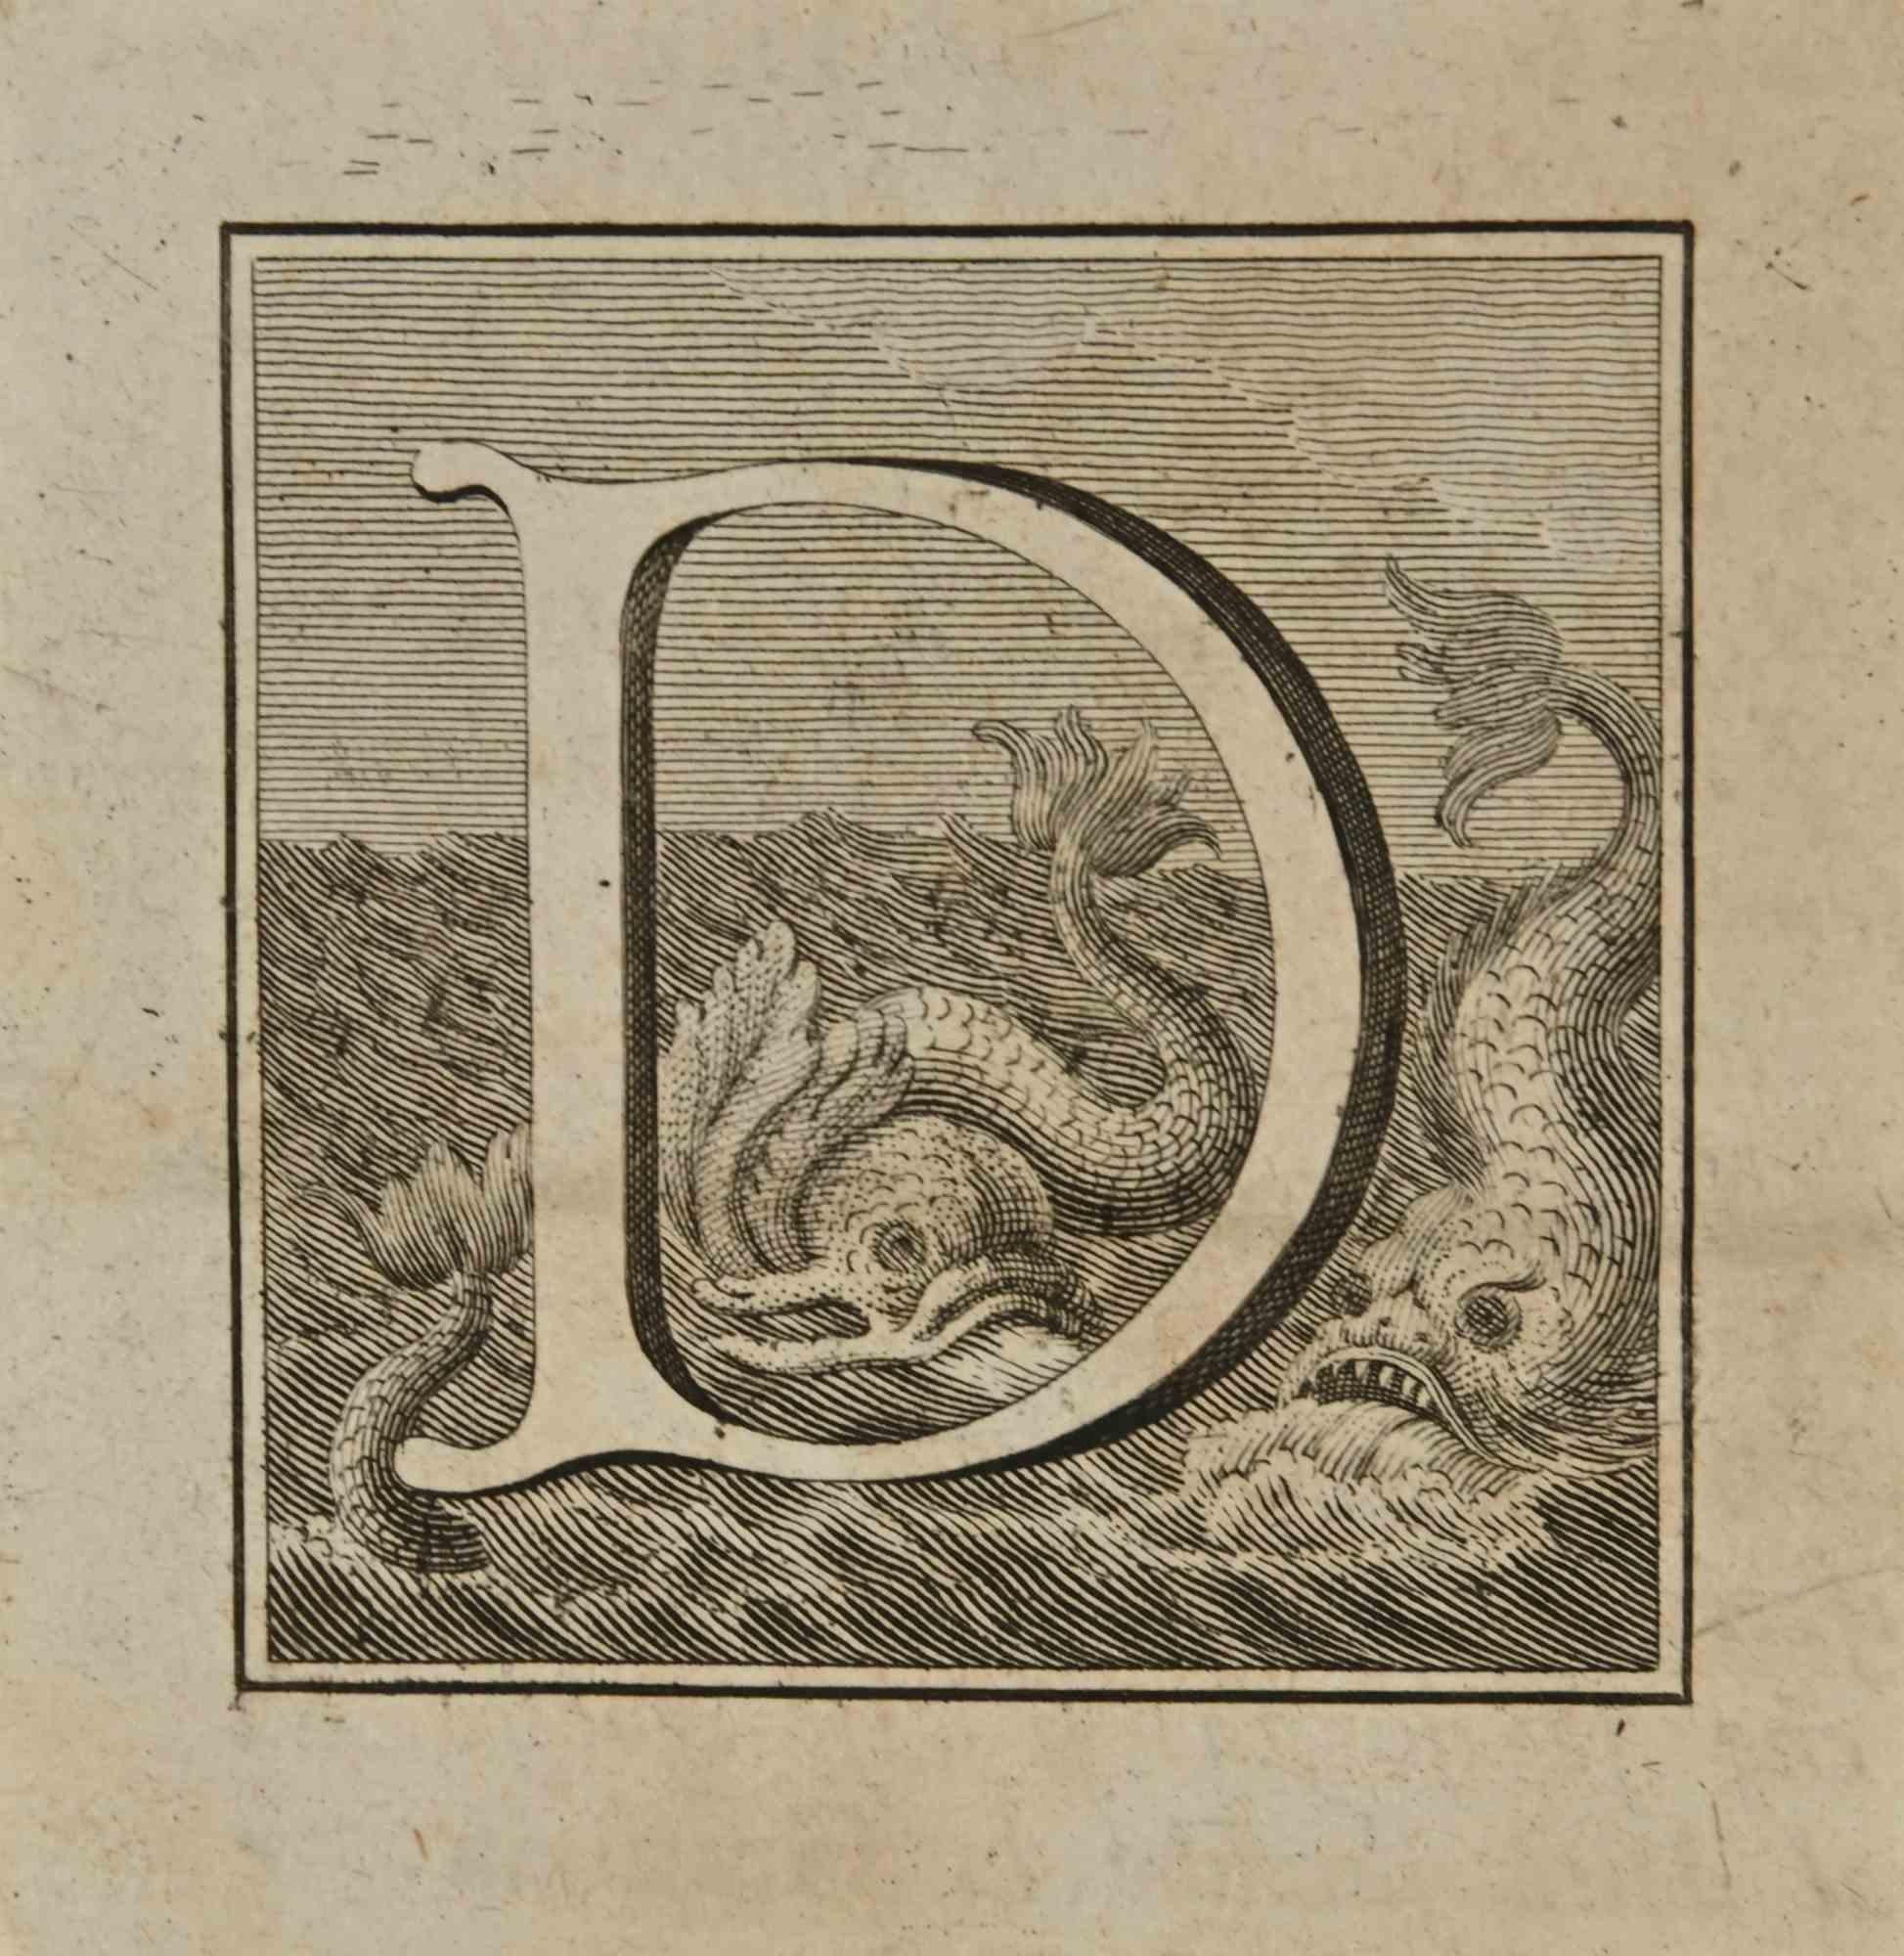 Letter of the Alphabet D,  from the series "Antiquities of Herculaneum", is an etching on paper realized by Luigi Vanvitelli in the 18th century.

Good conditions with folding.

The etching belongs to the print suite “Antiquities of Herculaneum